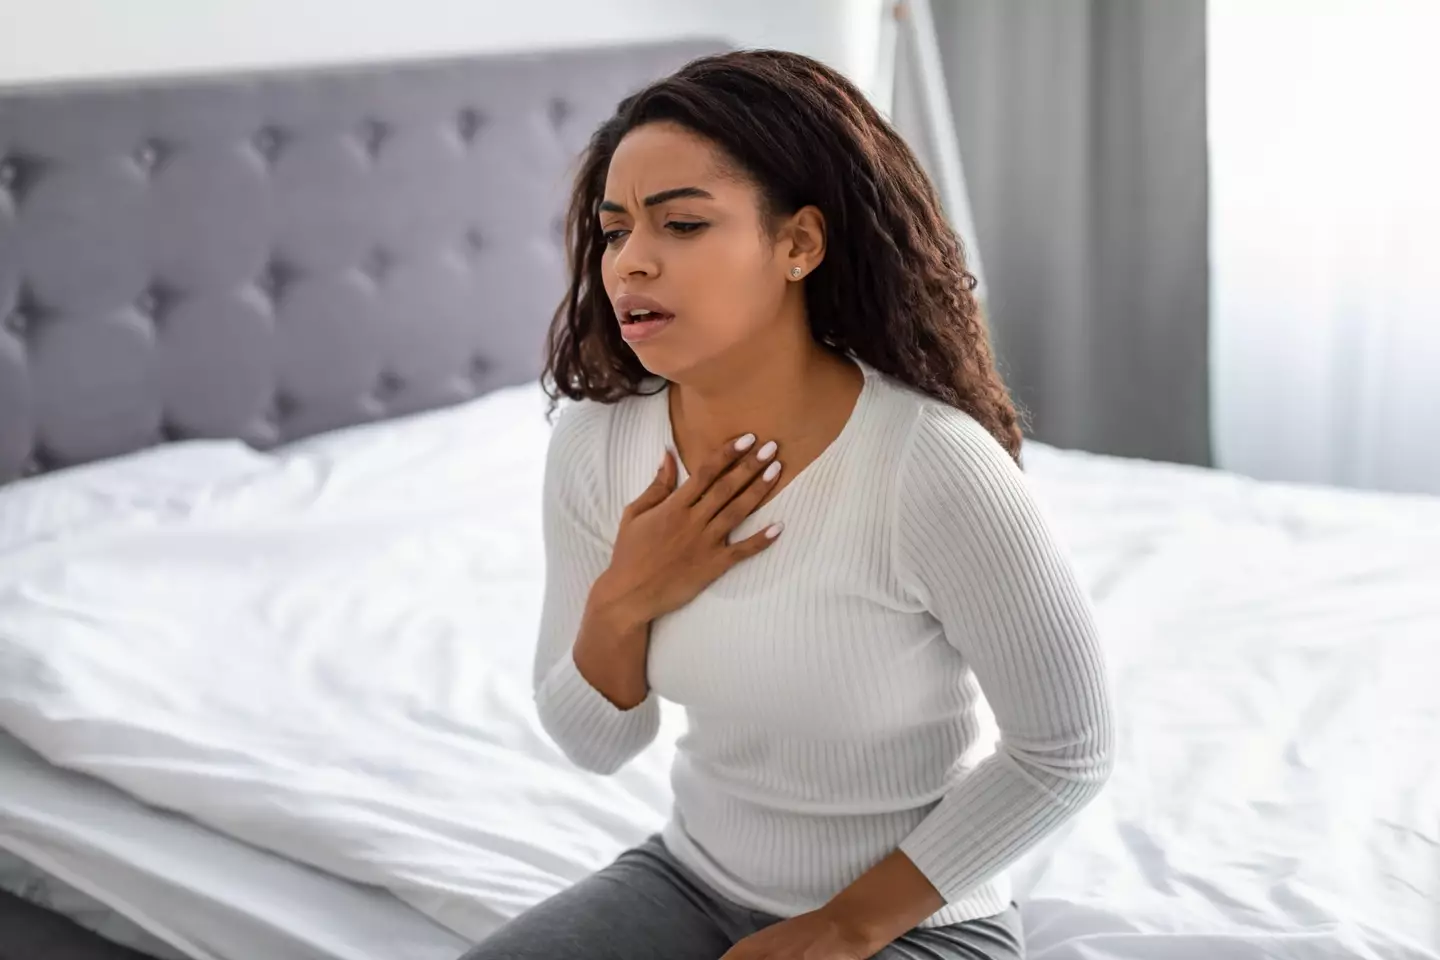 Throat Chlamydia symptoms include inflammation around the mouth and throat.